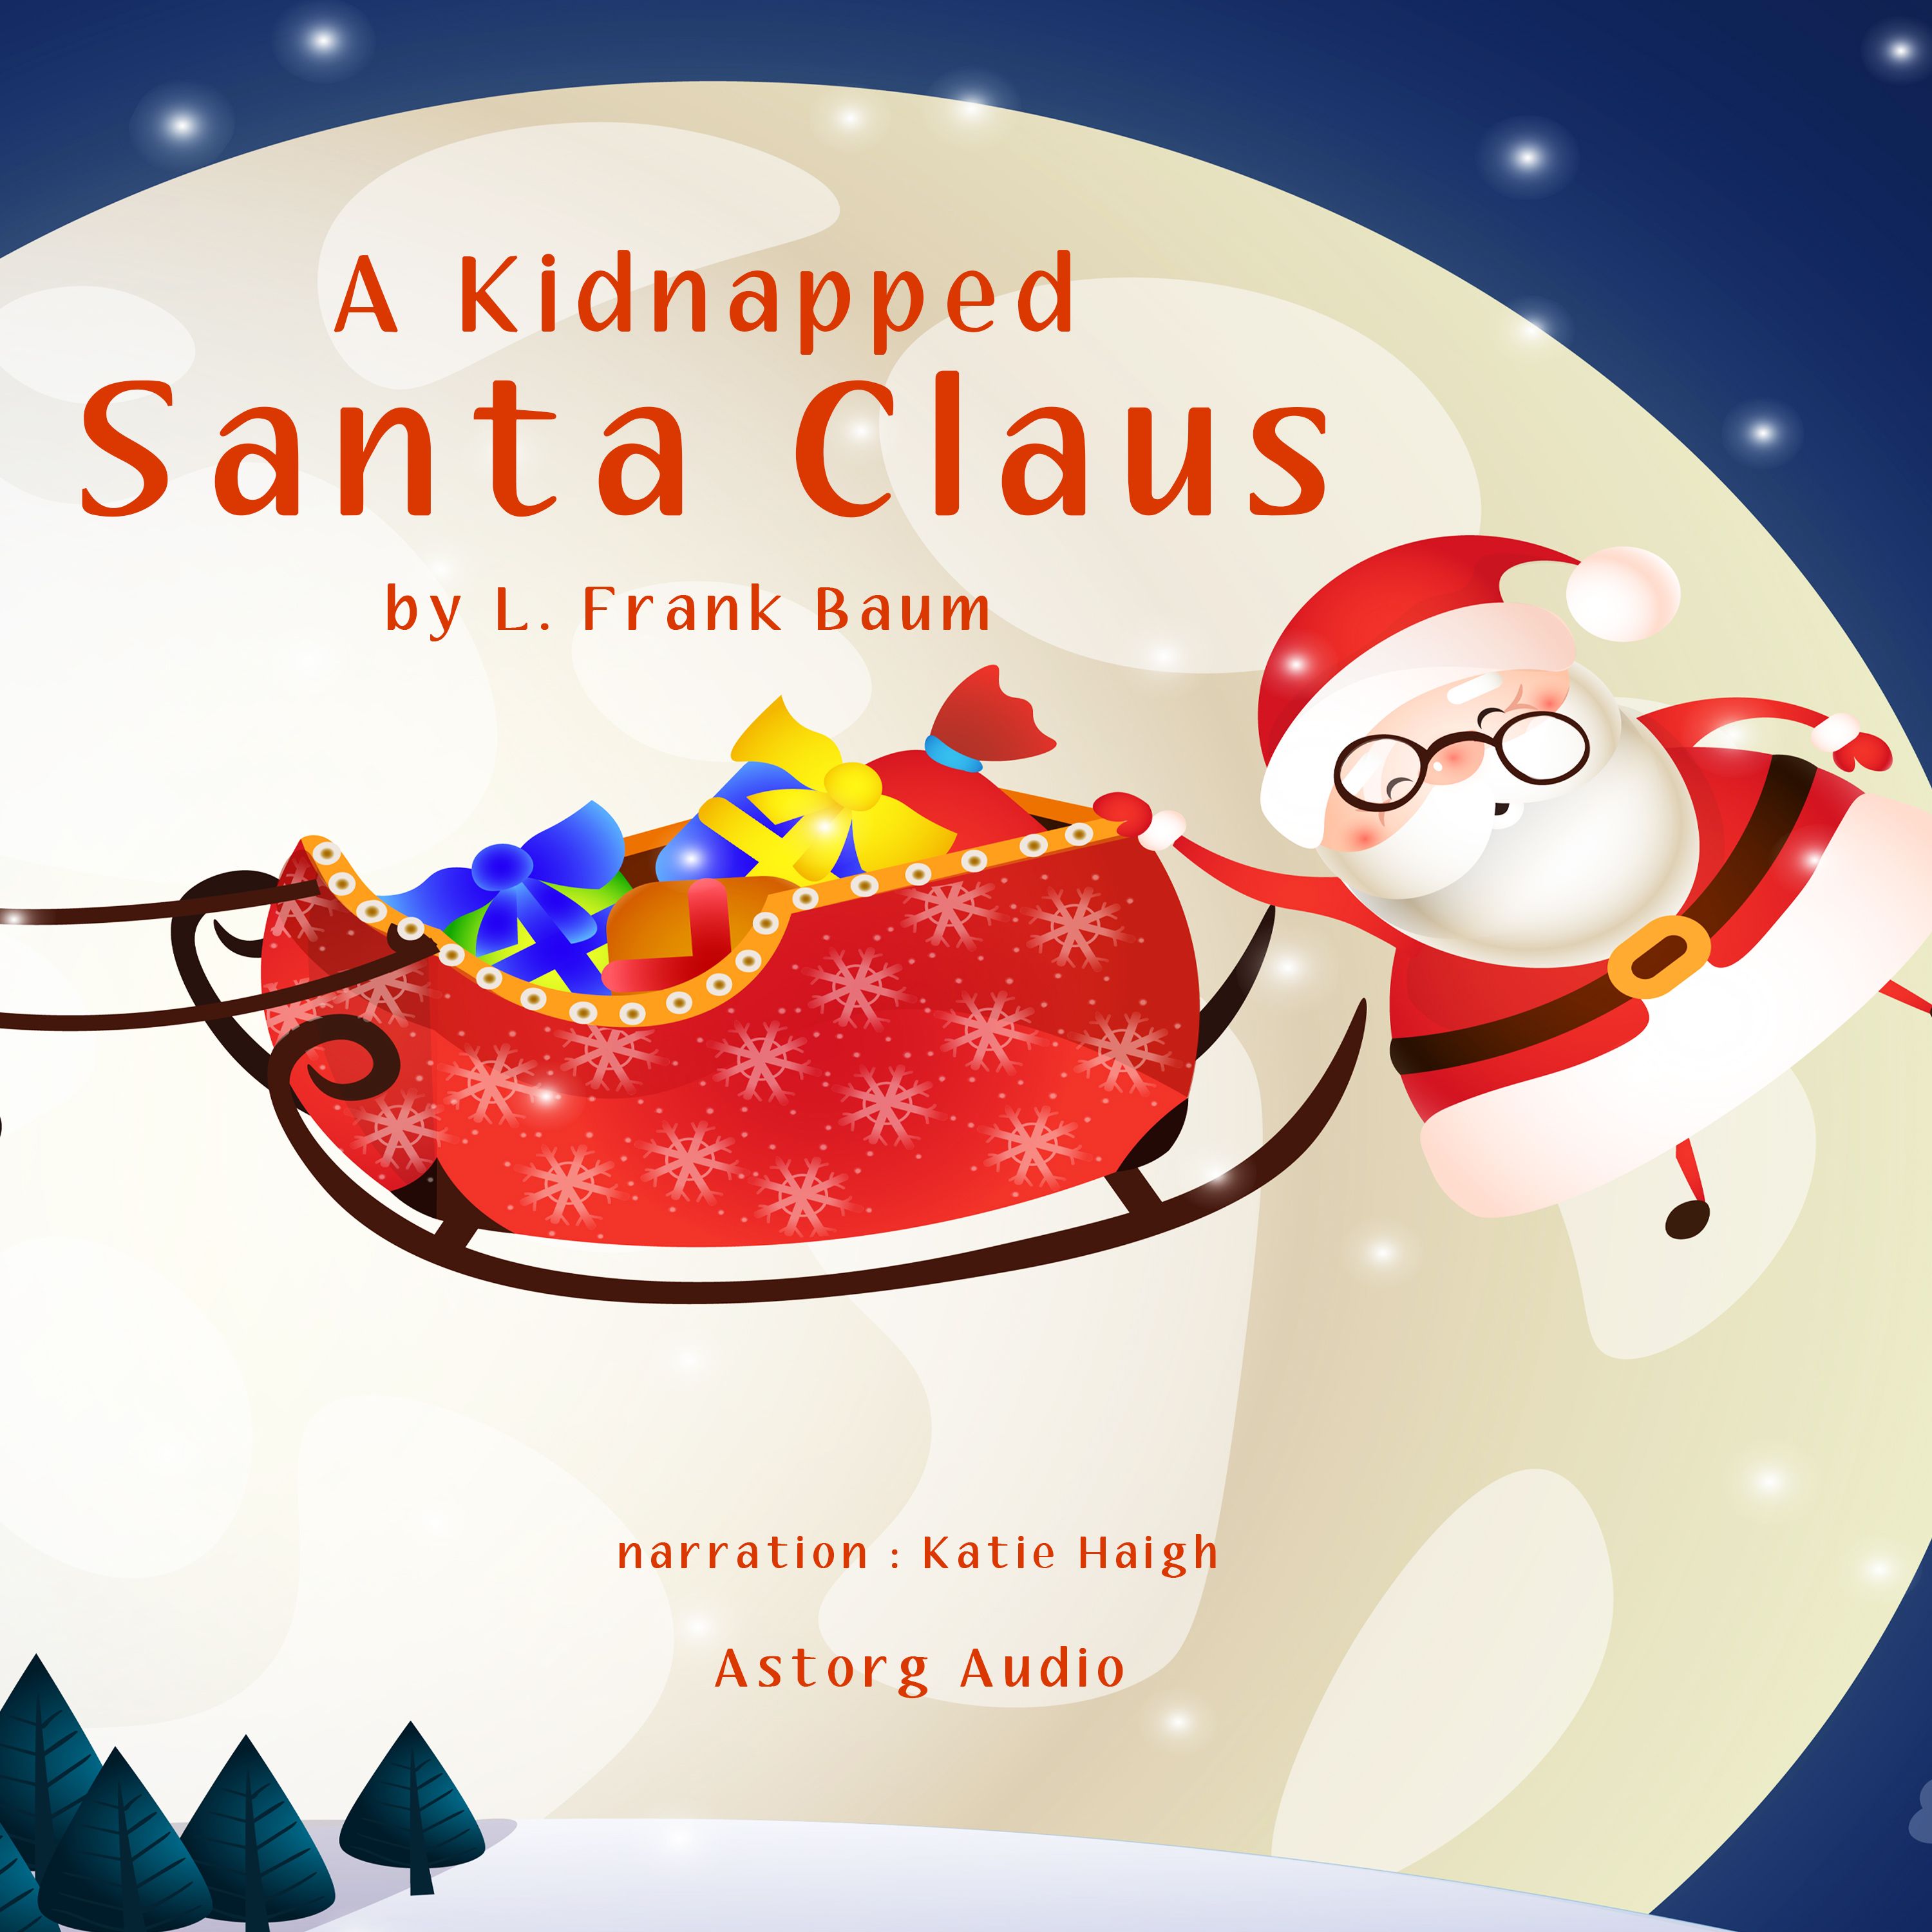 A Kidnapped Santa Claus, audiobook by L. Frank Baum